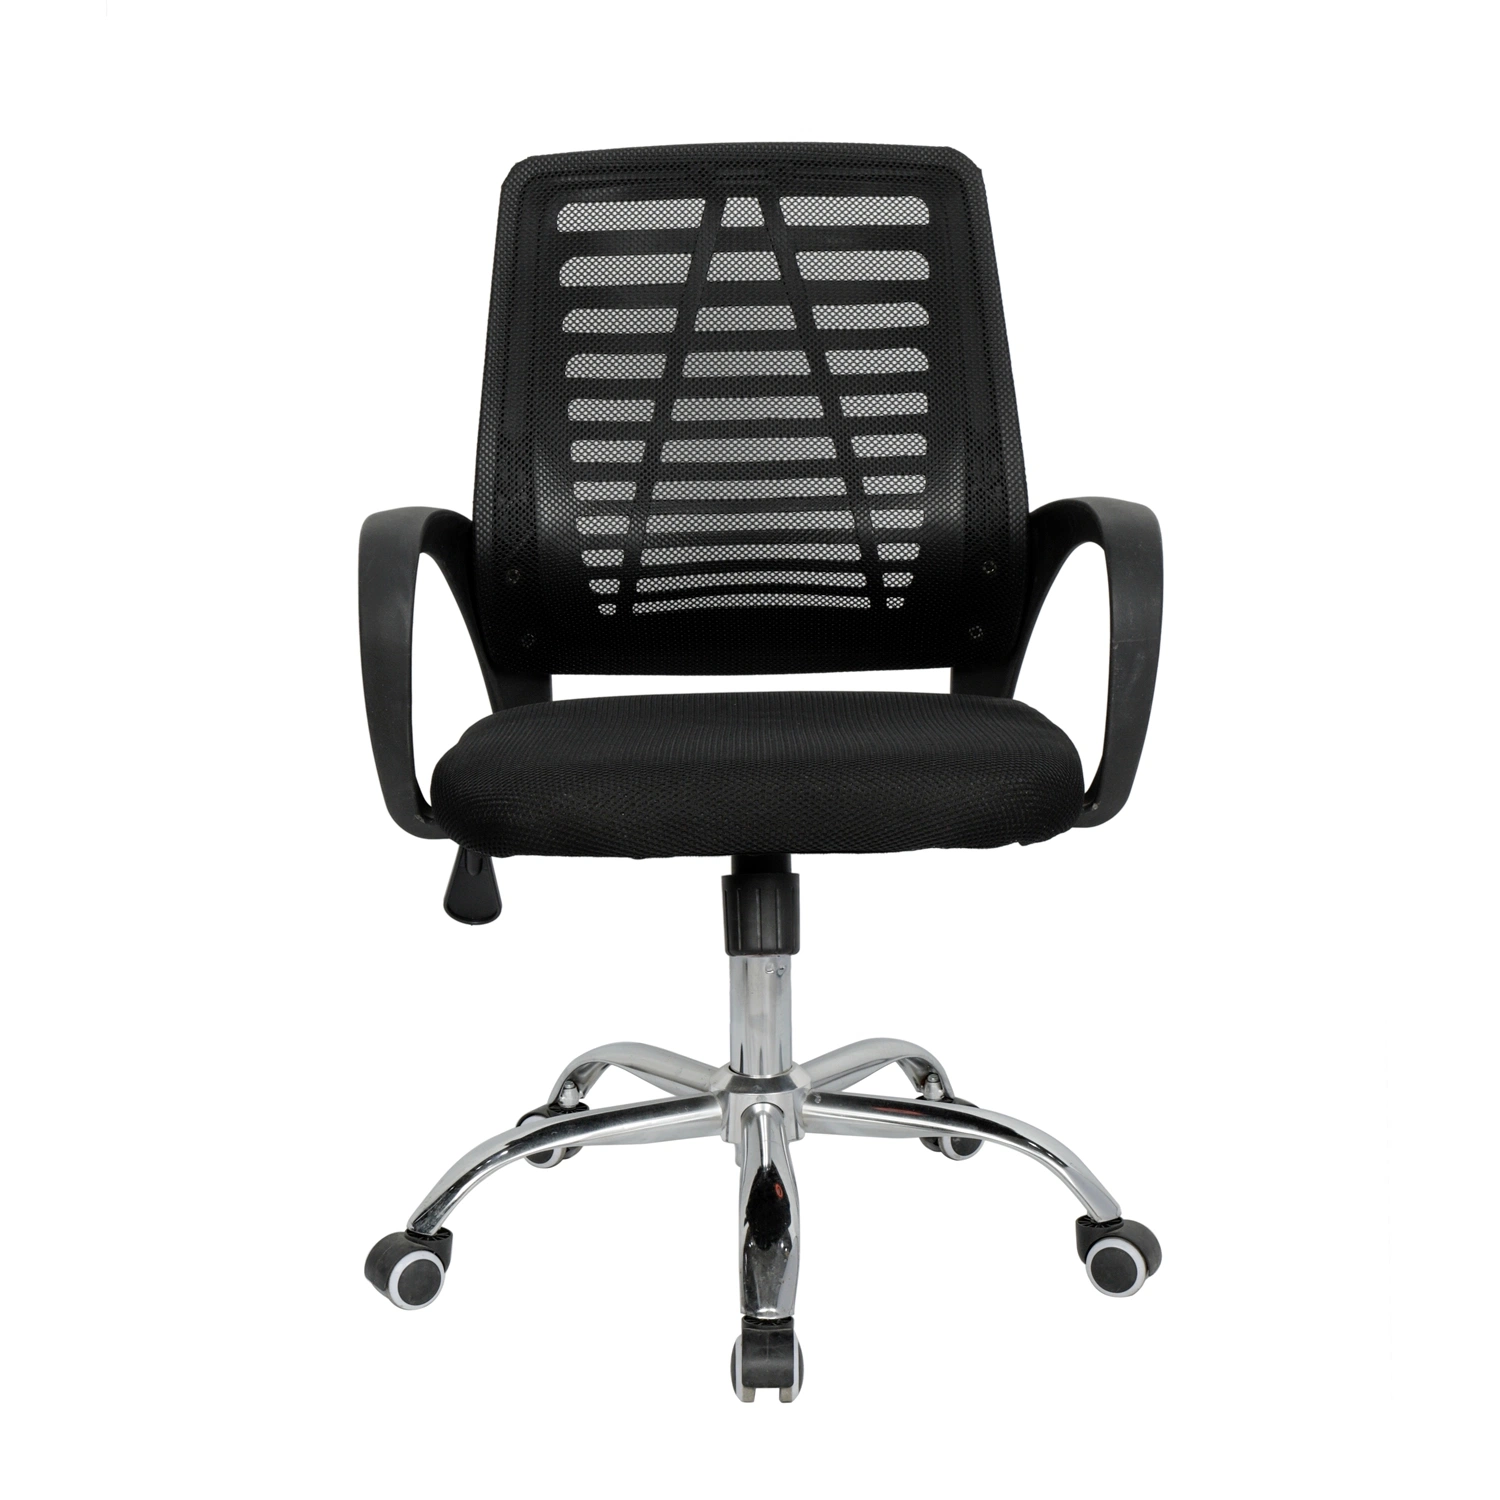 Office Mesh Chair Executive Ergonomic Rotating MID-Back Computer Chair